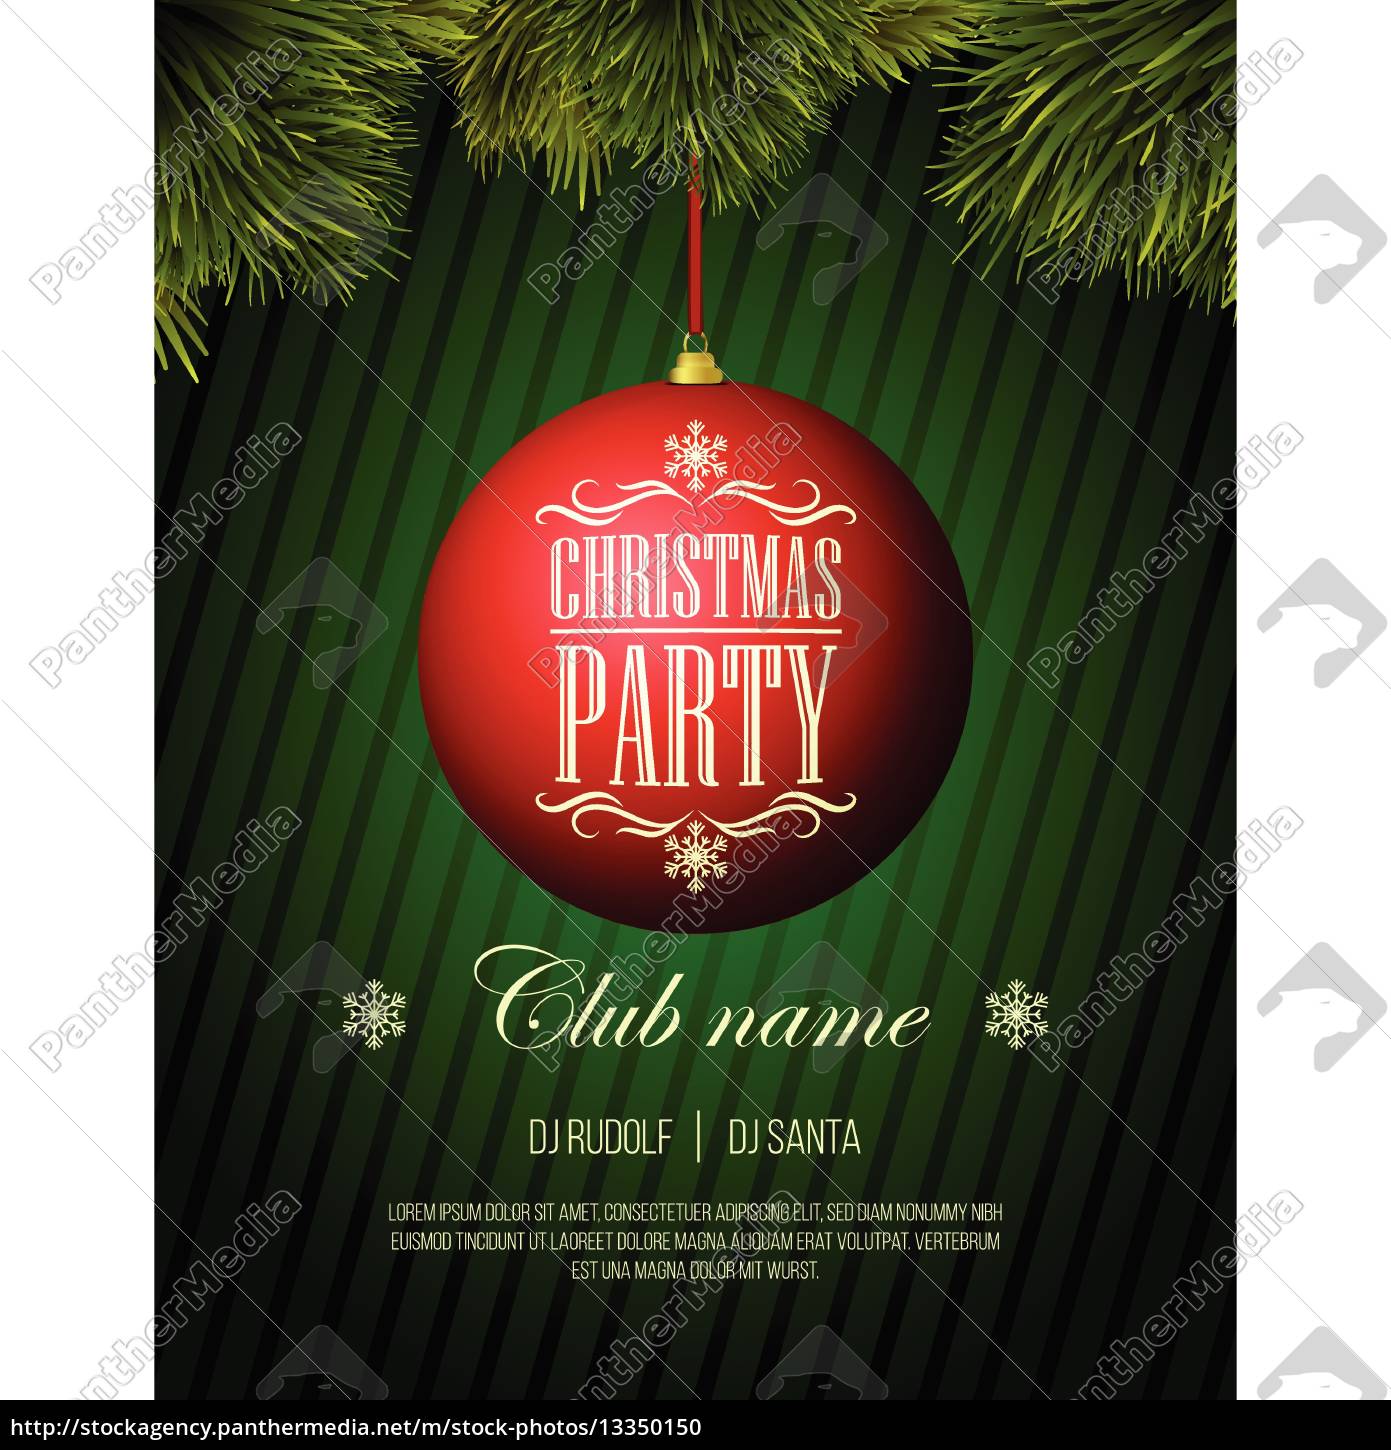 Christmas Party Flyer Template Red Bauble On A Green Royalty Free Image Panthermedia Stock Agency